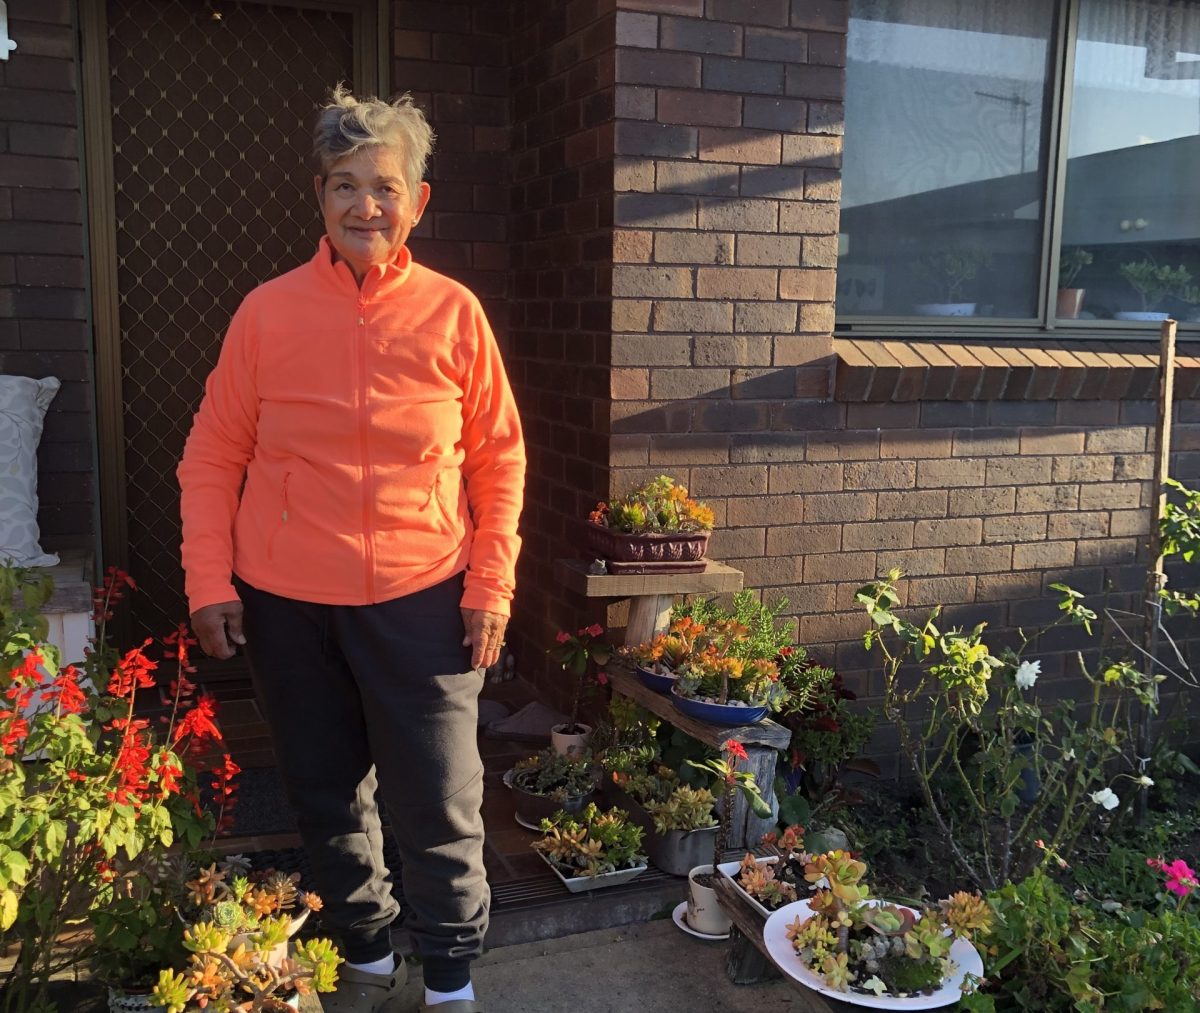 One of the tenants of the existing four units, Nieves Cridland, with the succulents she has grown in her garden.